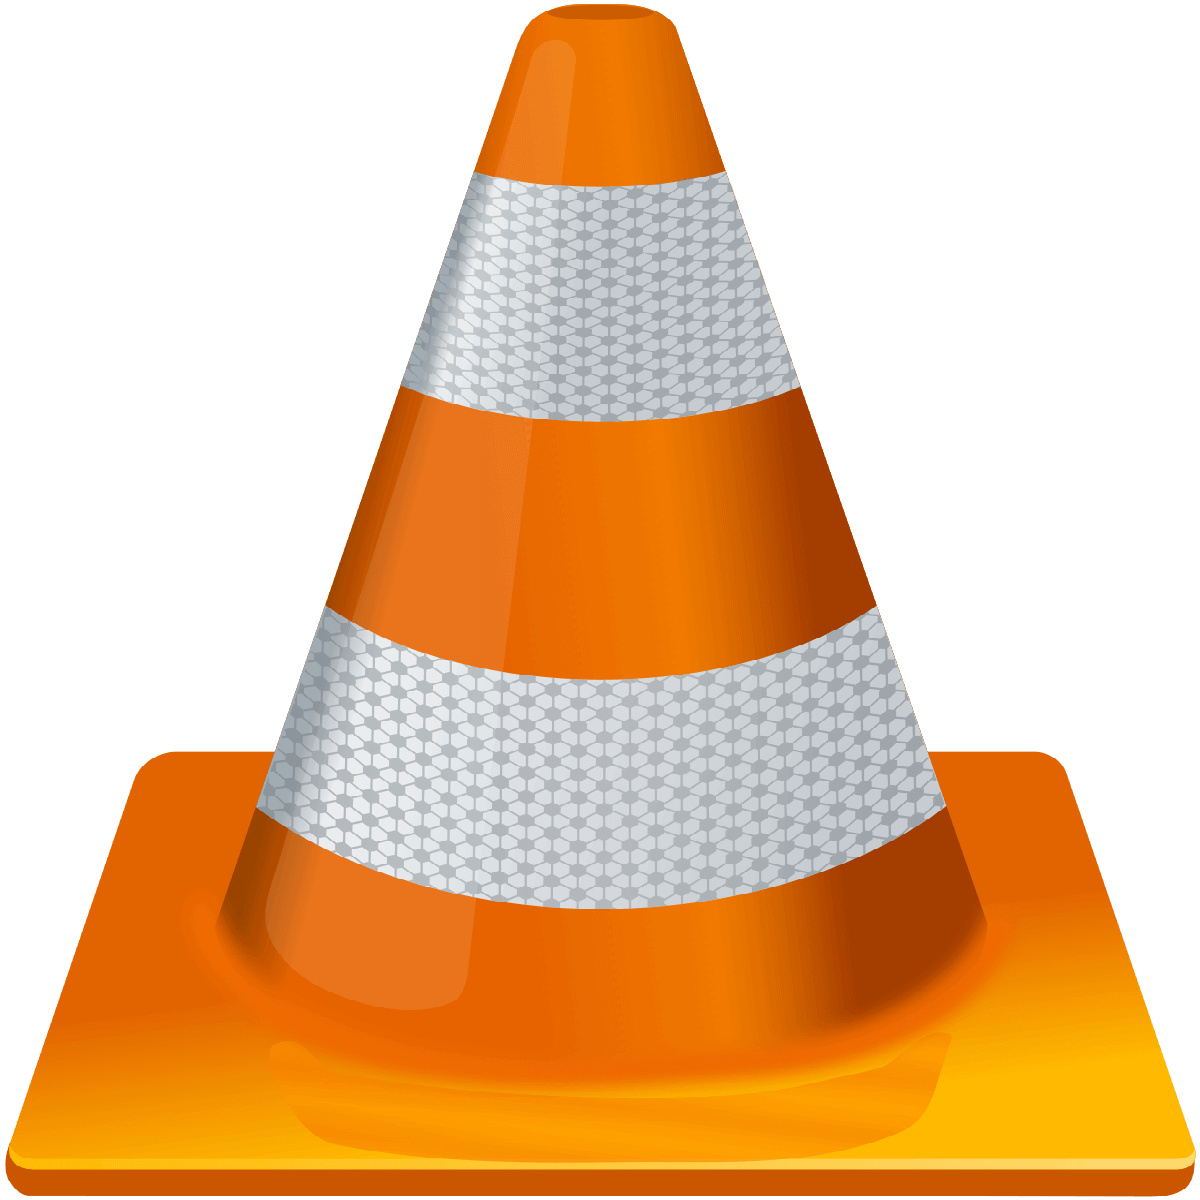 vlc media player for windows 10 reviews